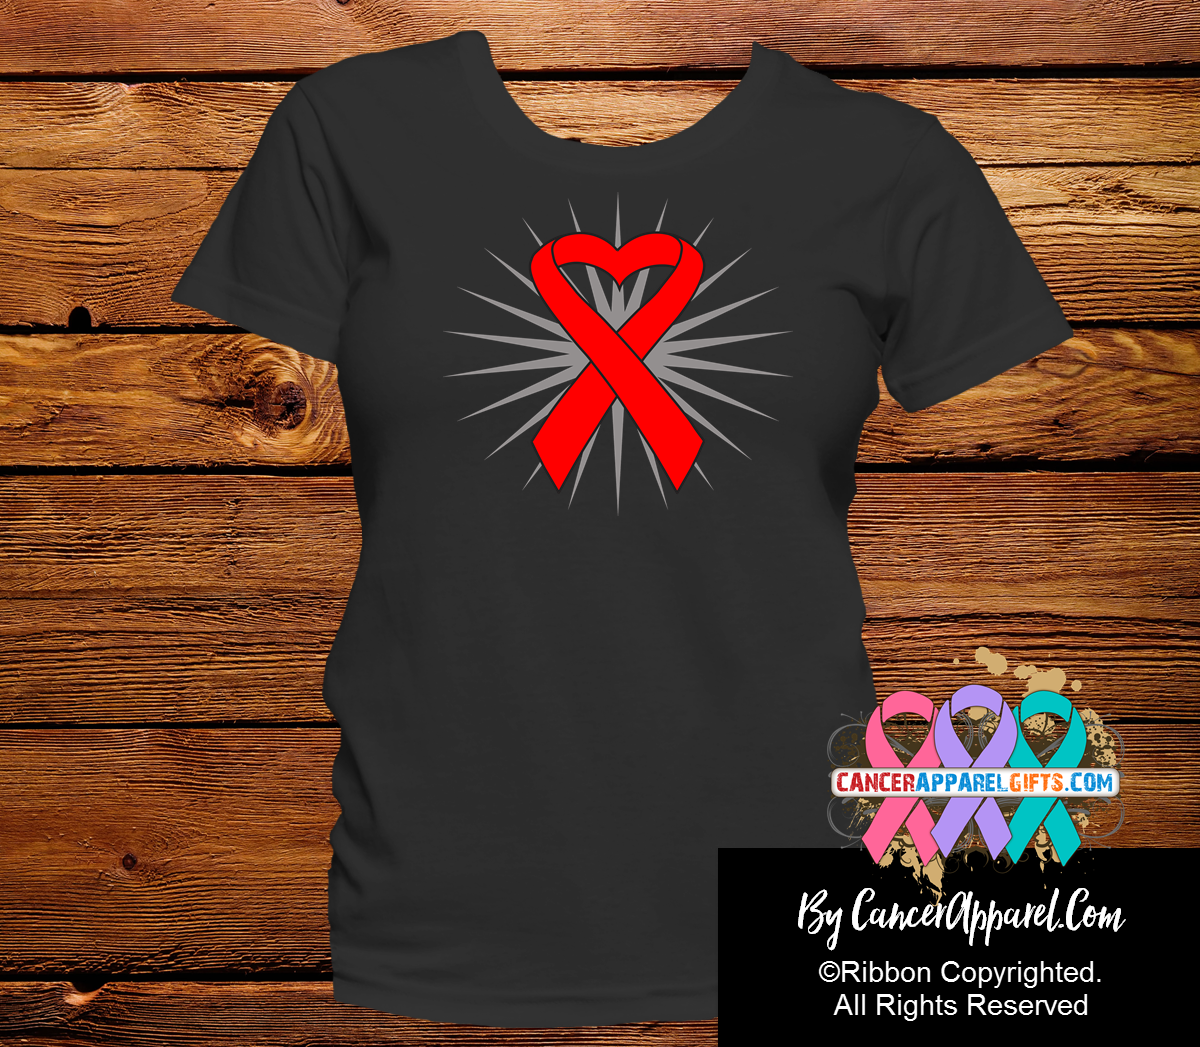 Blood Cancer Awareness Heart Ribbon Shirts - Cancer Apparel and Gifts